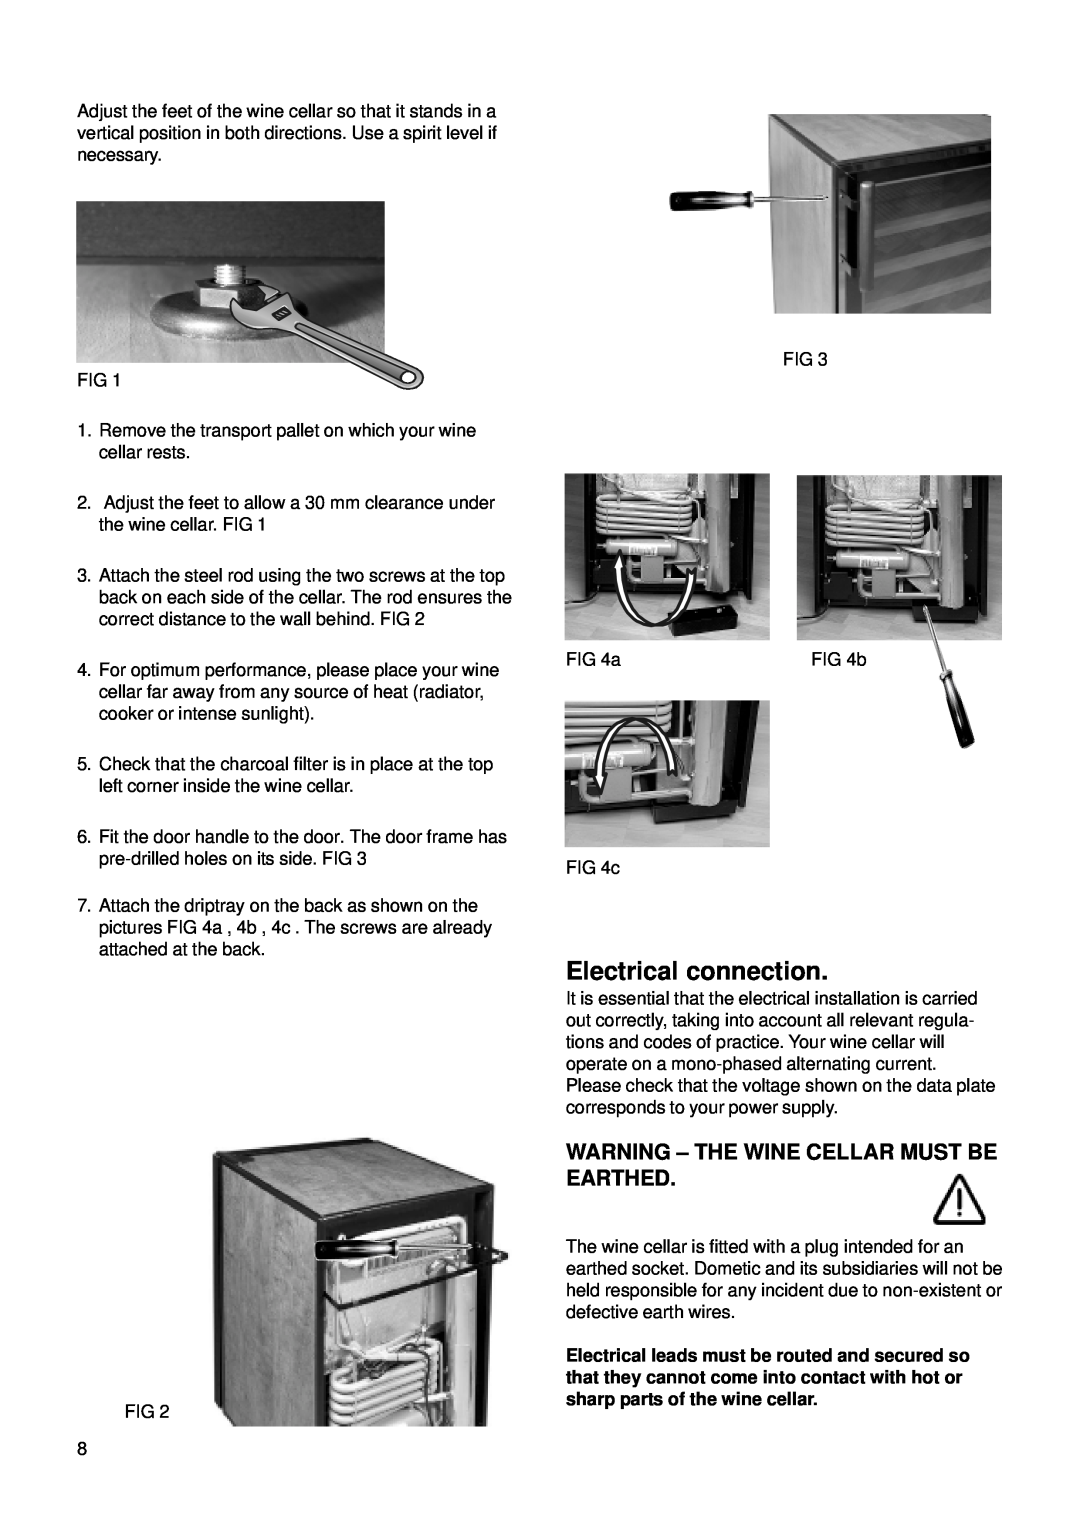 Dometic CS 52 instruction manual Electrical connection, Warning - The Wine Cellar Must Be Earthed 